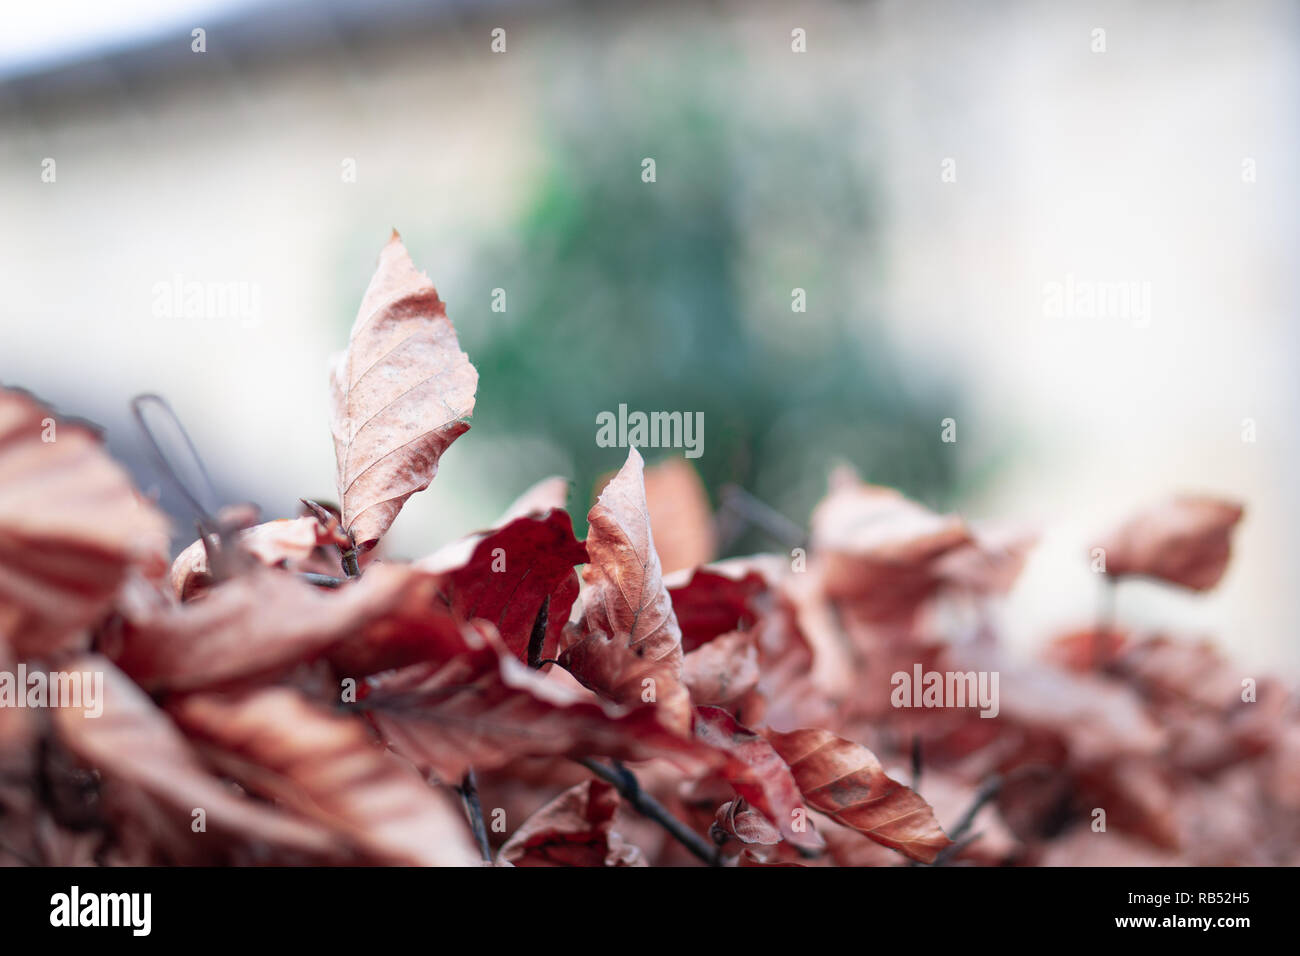 A photo showing leaves on a hedge on a cold winters day with a shallow depth of field. Stock Photo